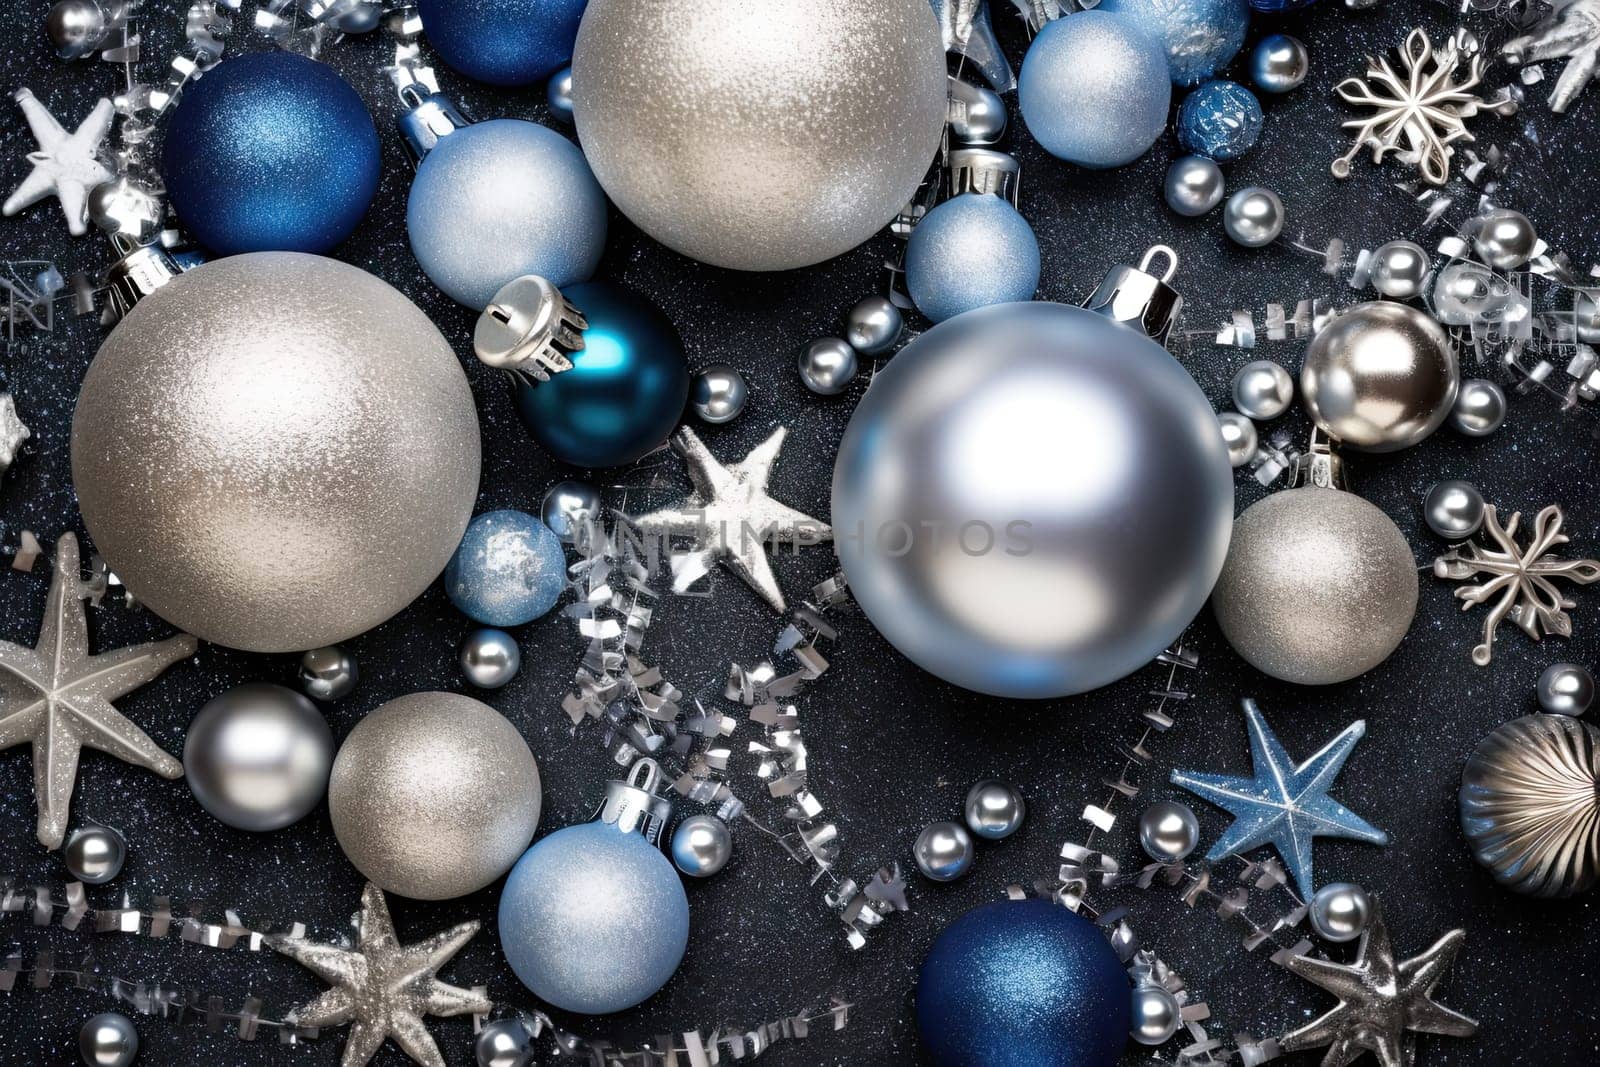 A Festive Display: Blue and Silver Ornaments Sparkle on a Decorative Table